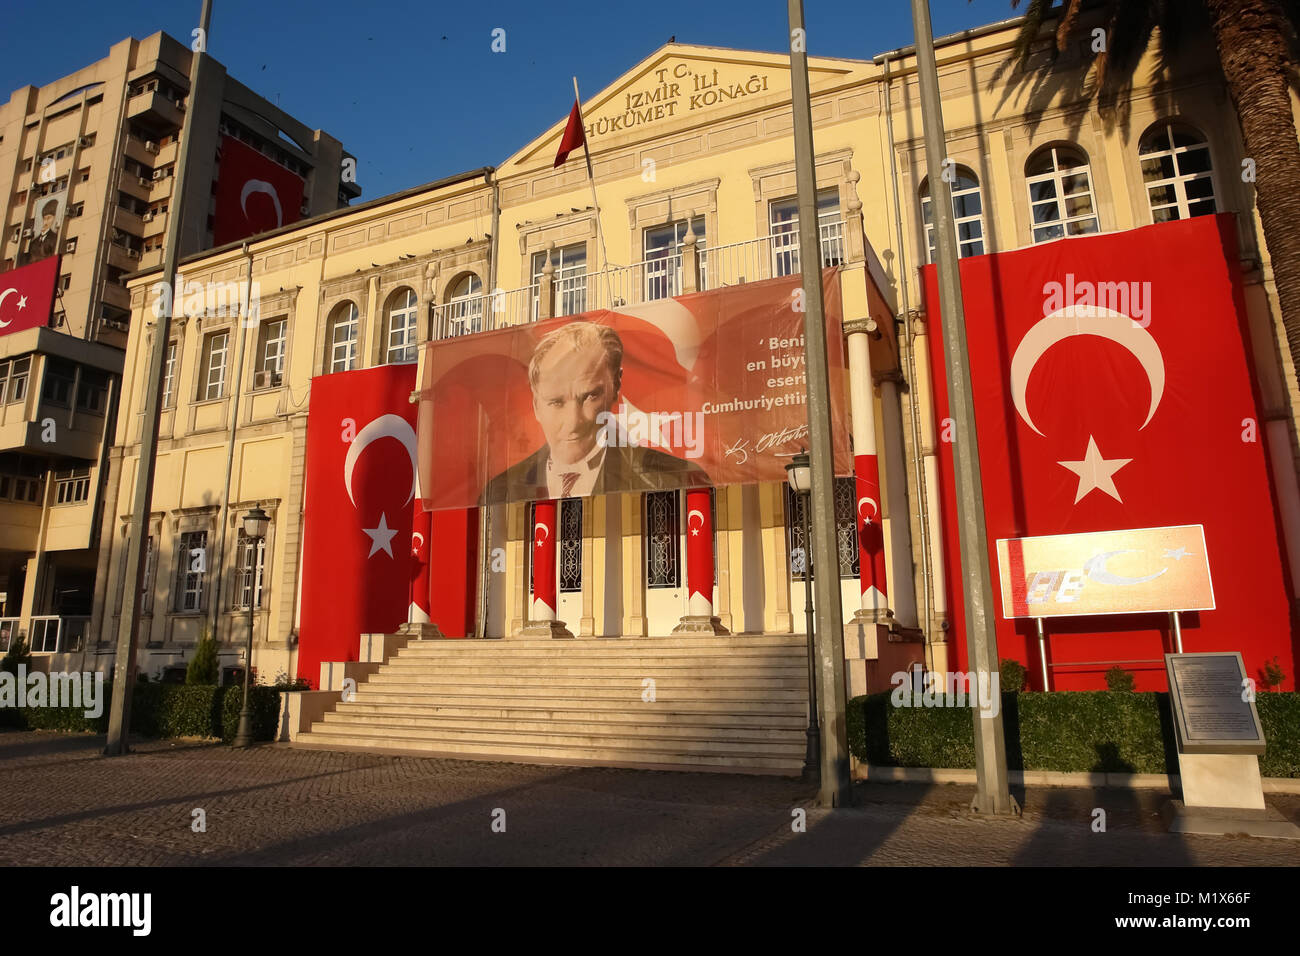 Izmir, Turkey - April 21, 2012: Building of the Government House in evening on sunset in Izmir. The governor's office on Konak Square is one of the ci Stock Photo